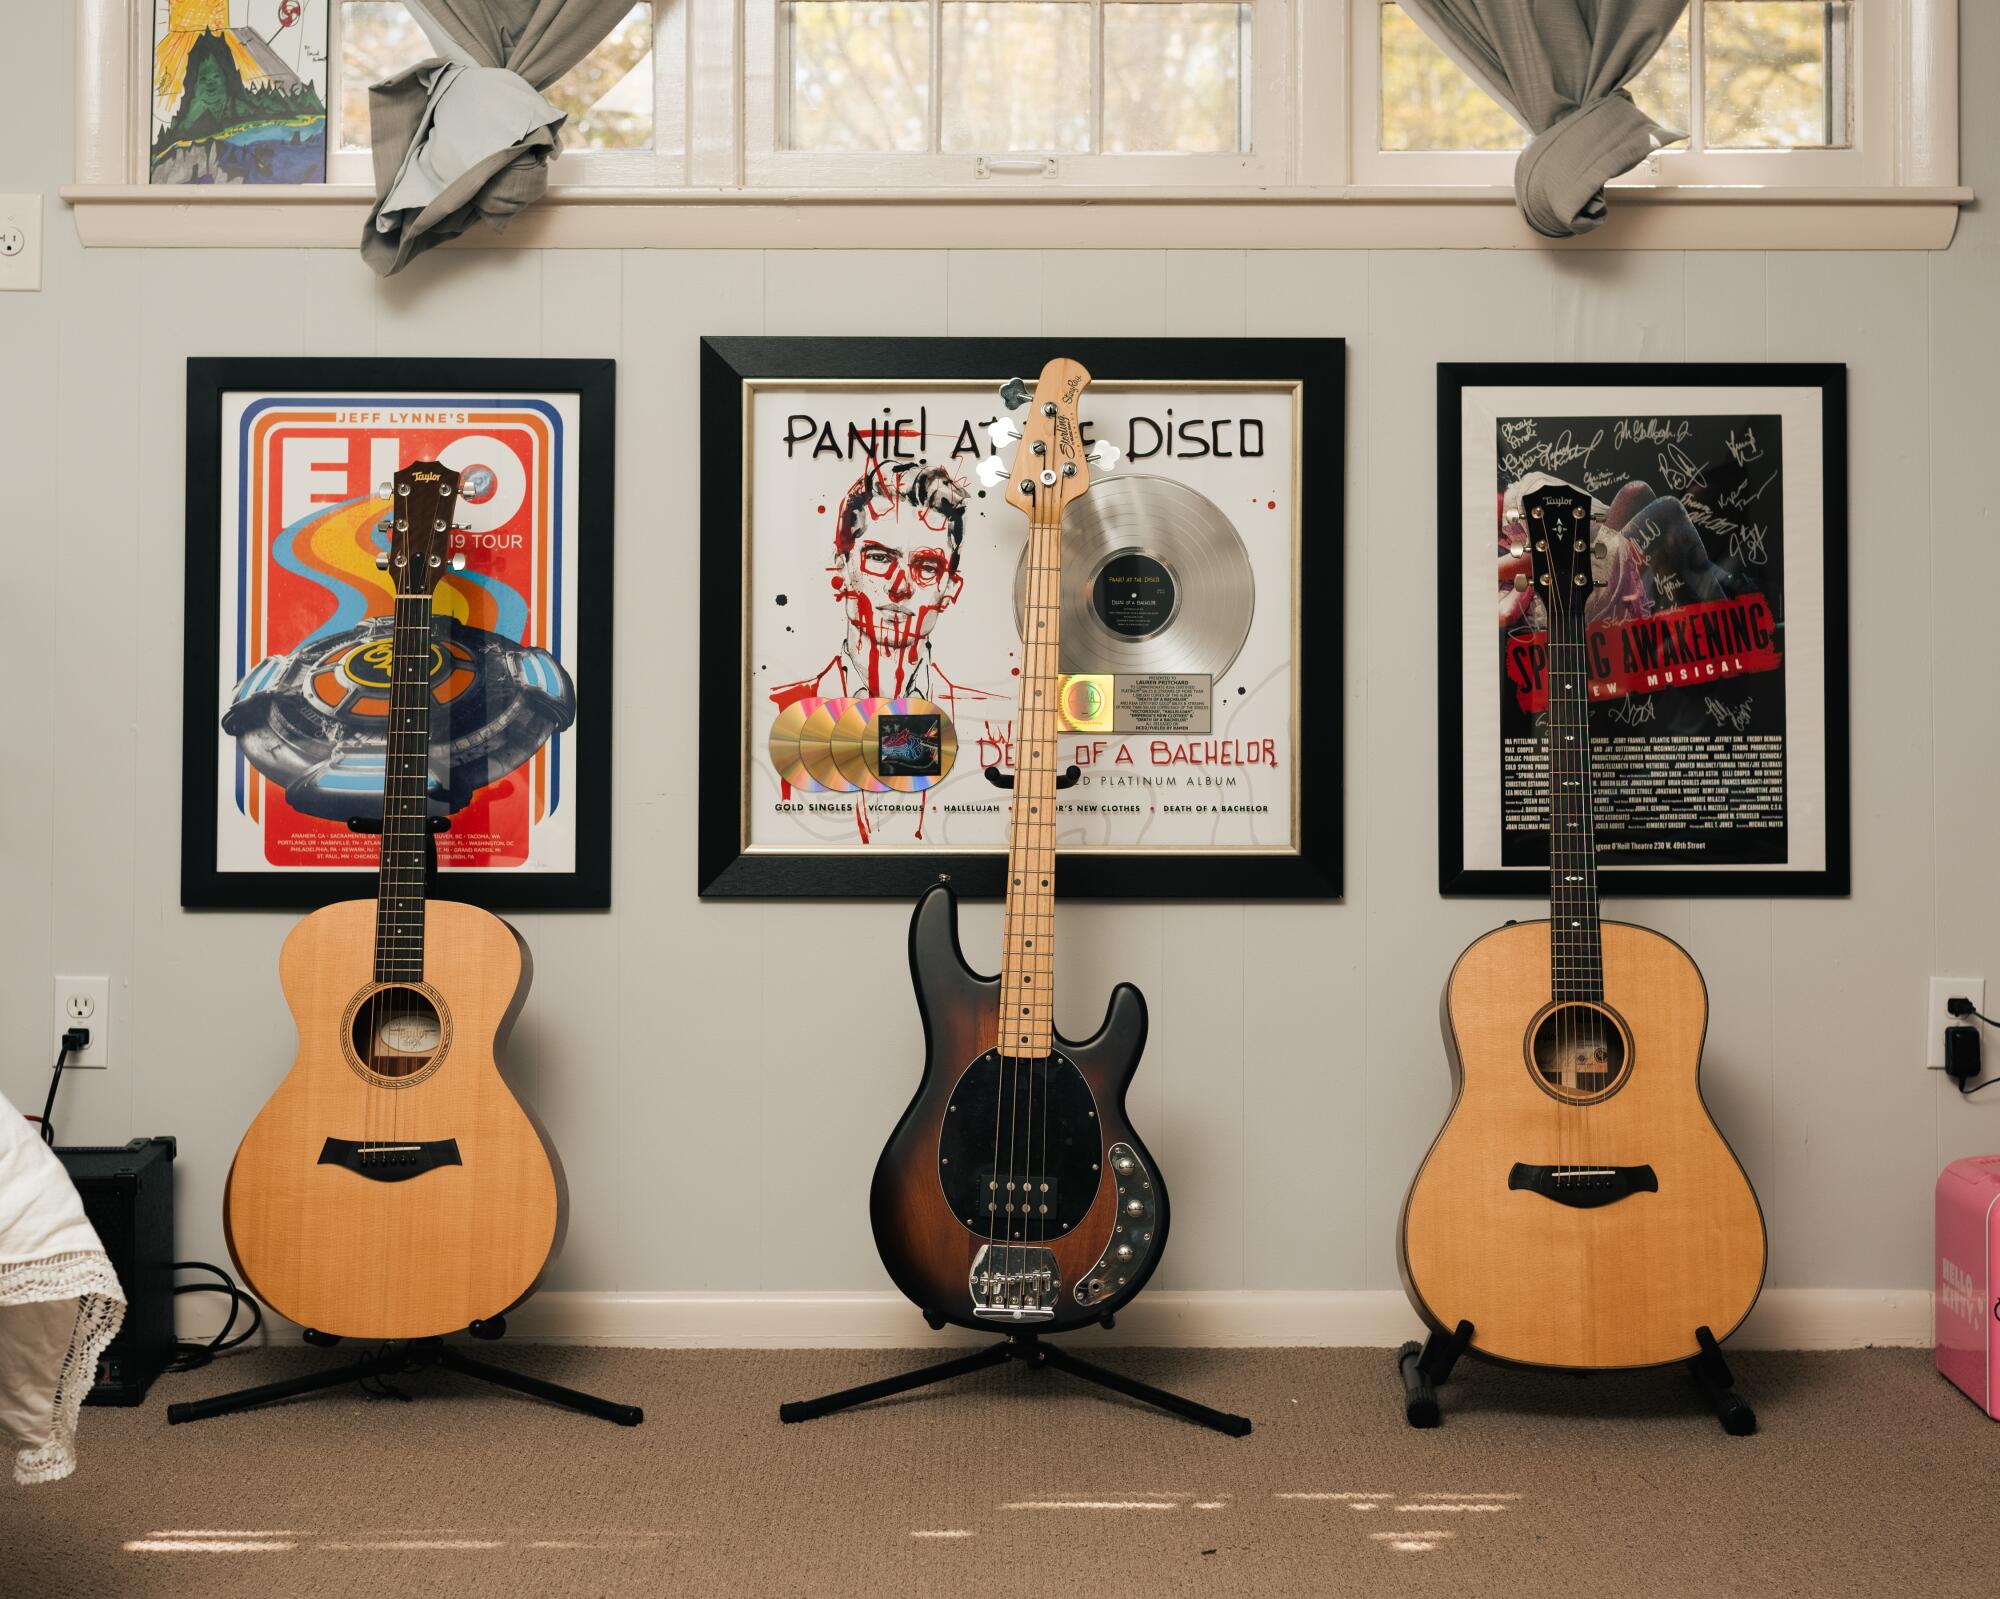 A Panic at the Disco and "Spring Awakening" poster are framed on a wall near three guitars.